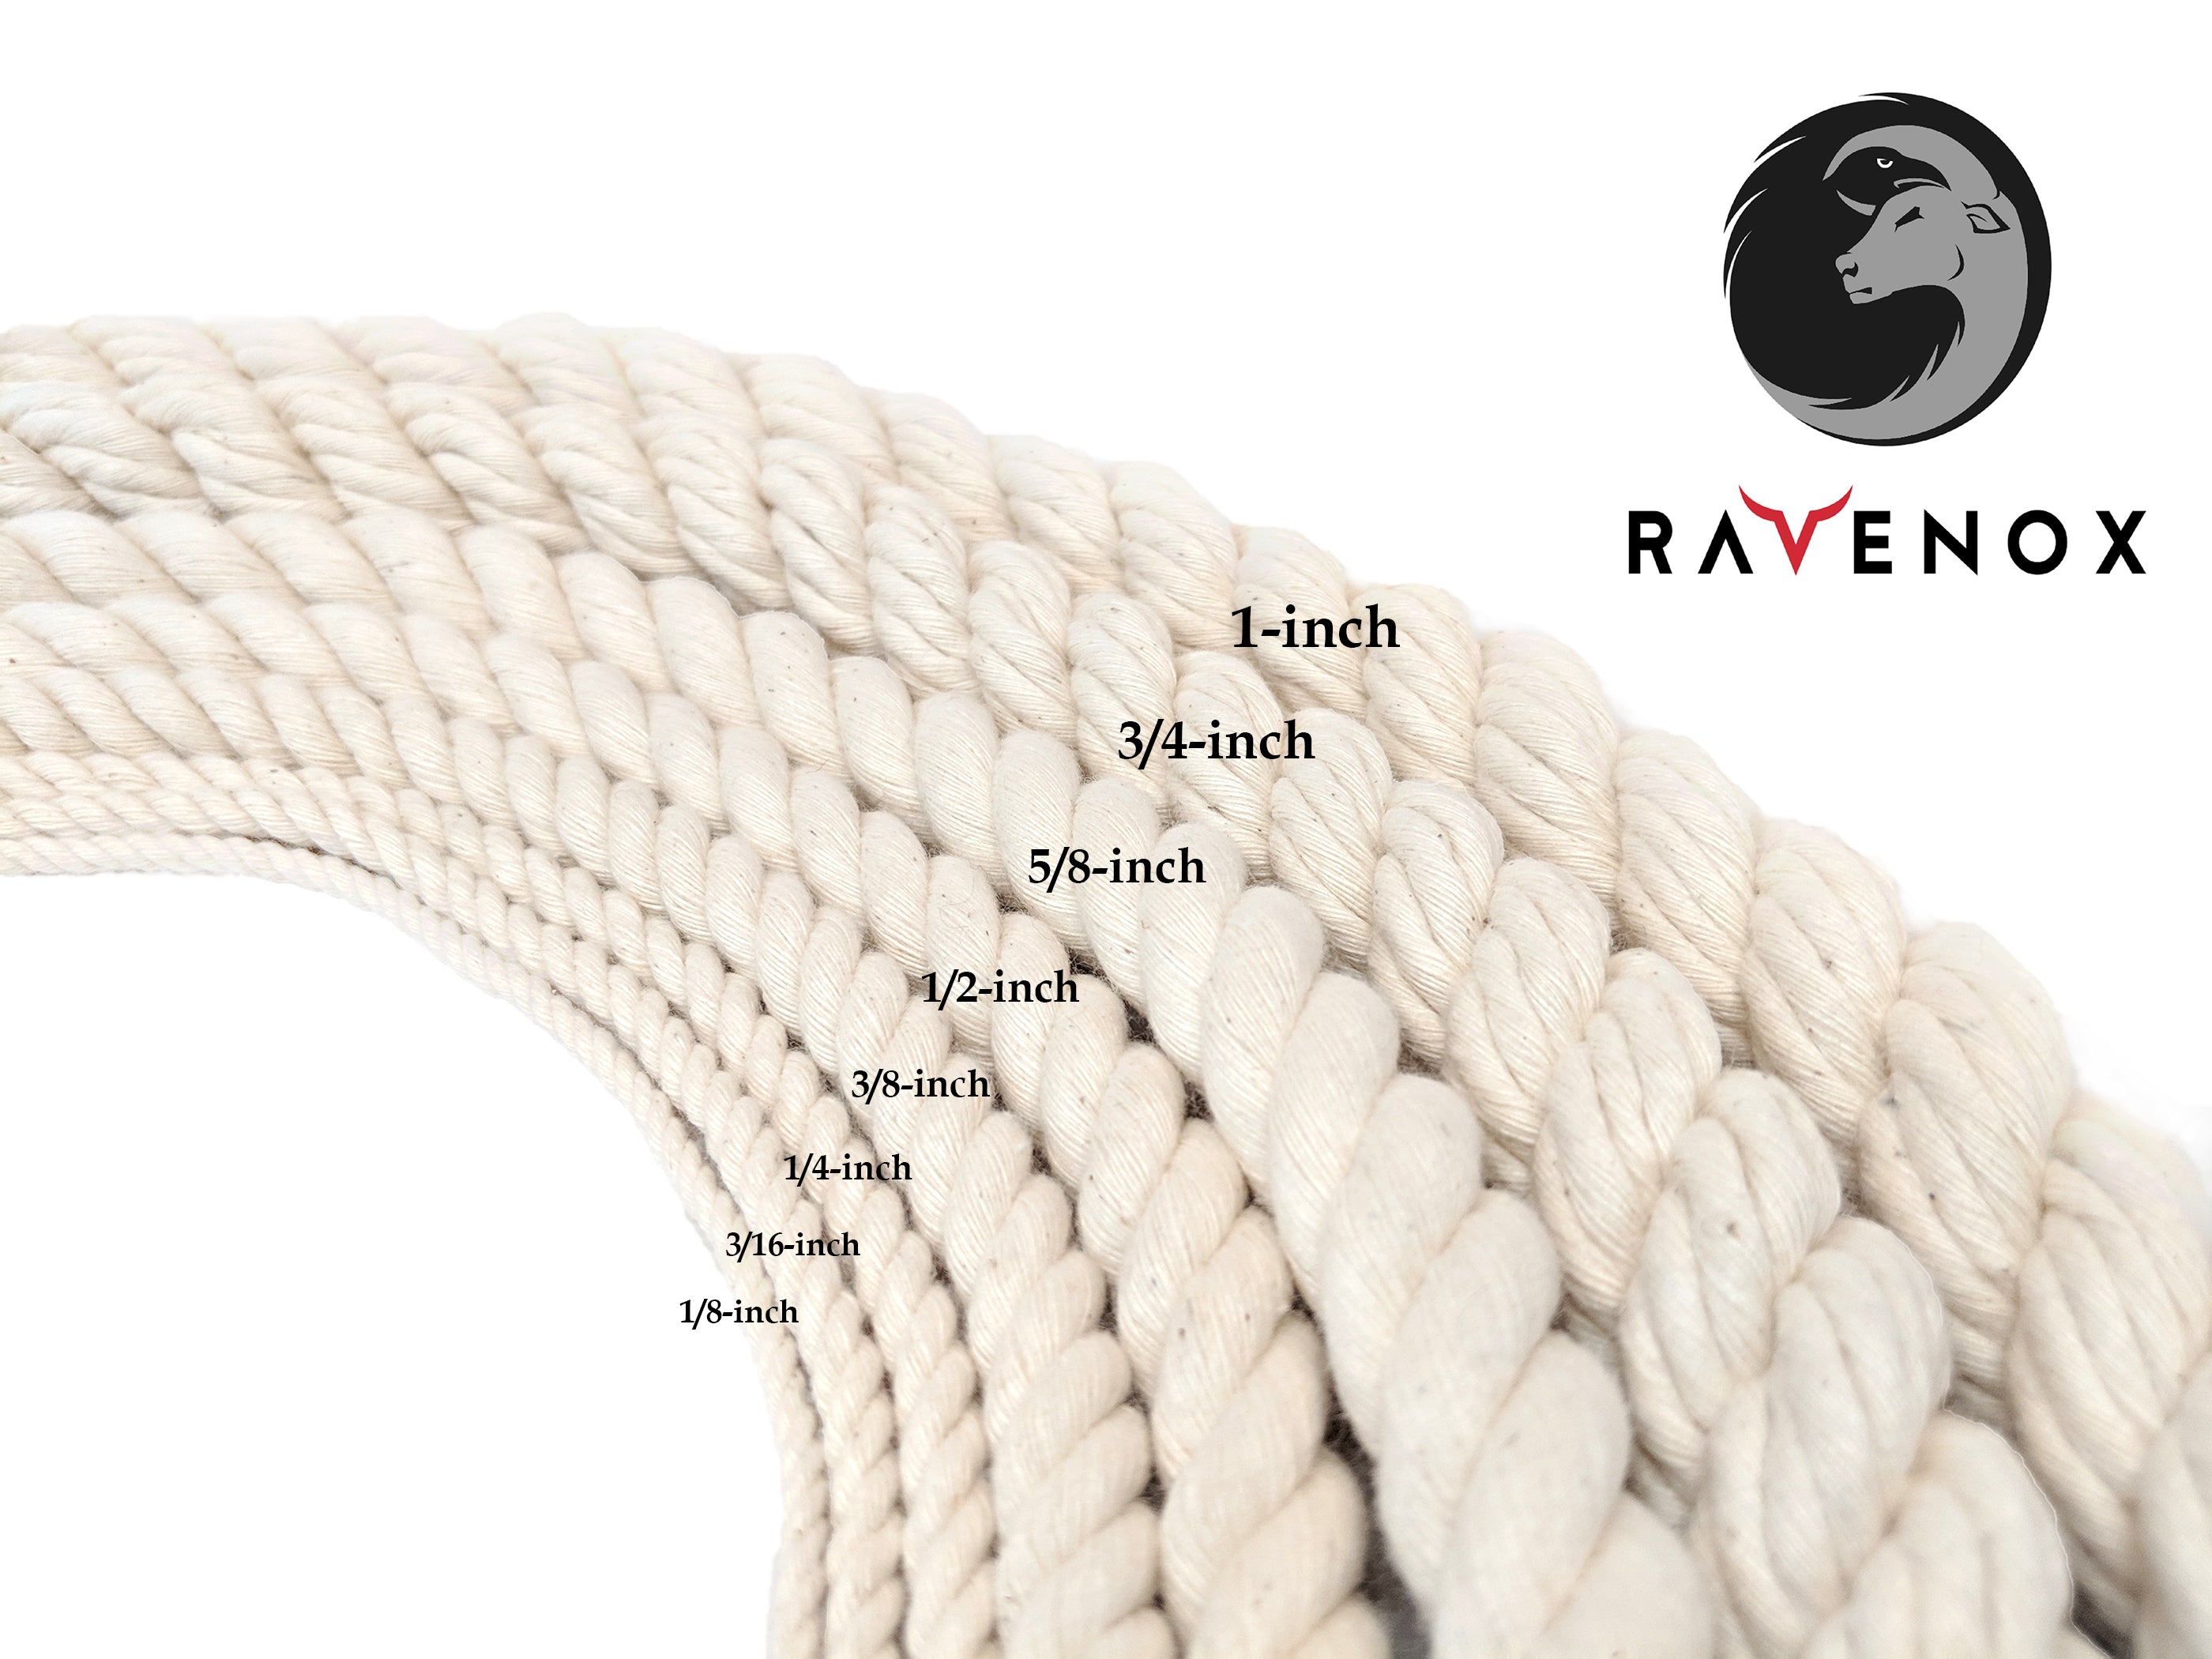 Ravenox Colorful Twisted Cotton Rope Crafts Macramé and Indoor Outdoor Use by The Foot and Diameter Made in The USA Custom Color Triple-Strand Rope and Cordage for Sport Pet Toys Décor 